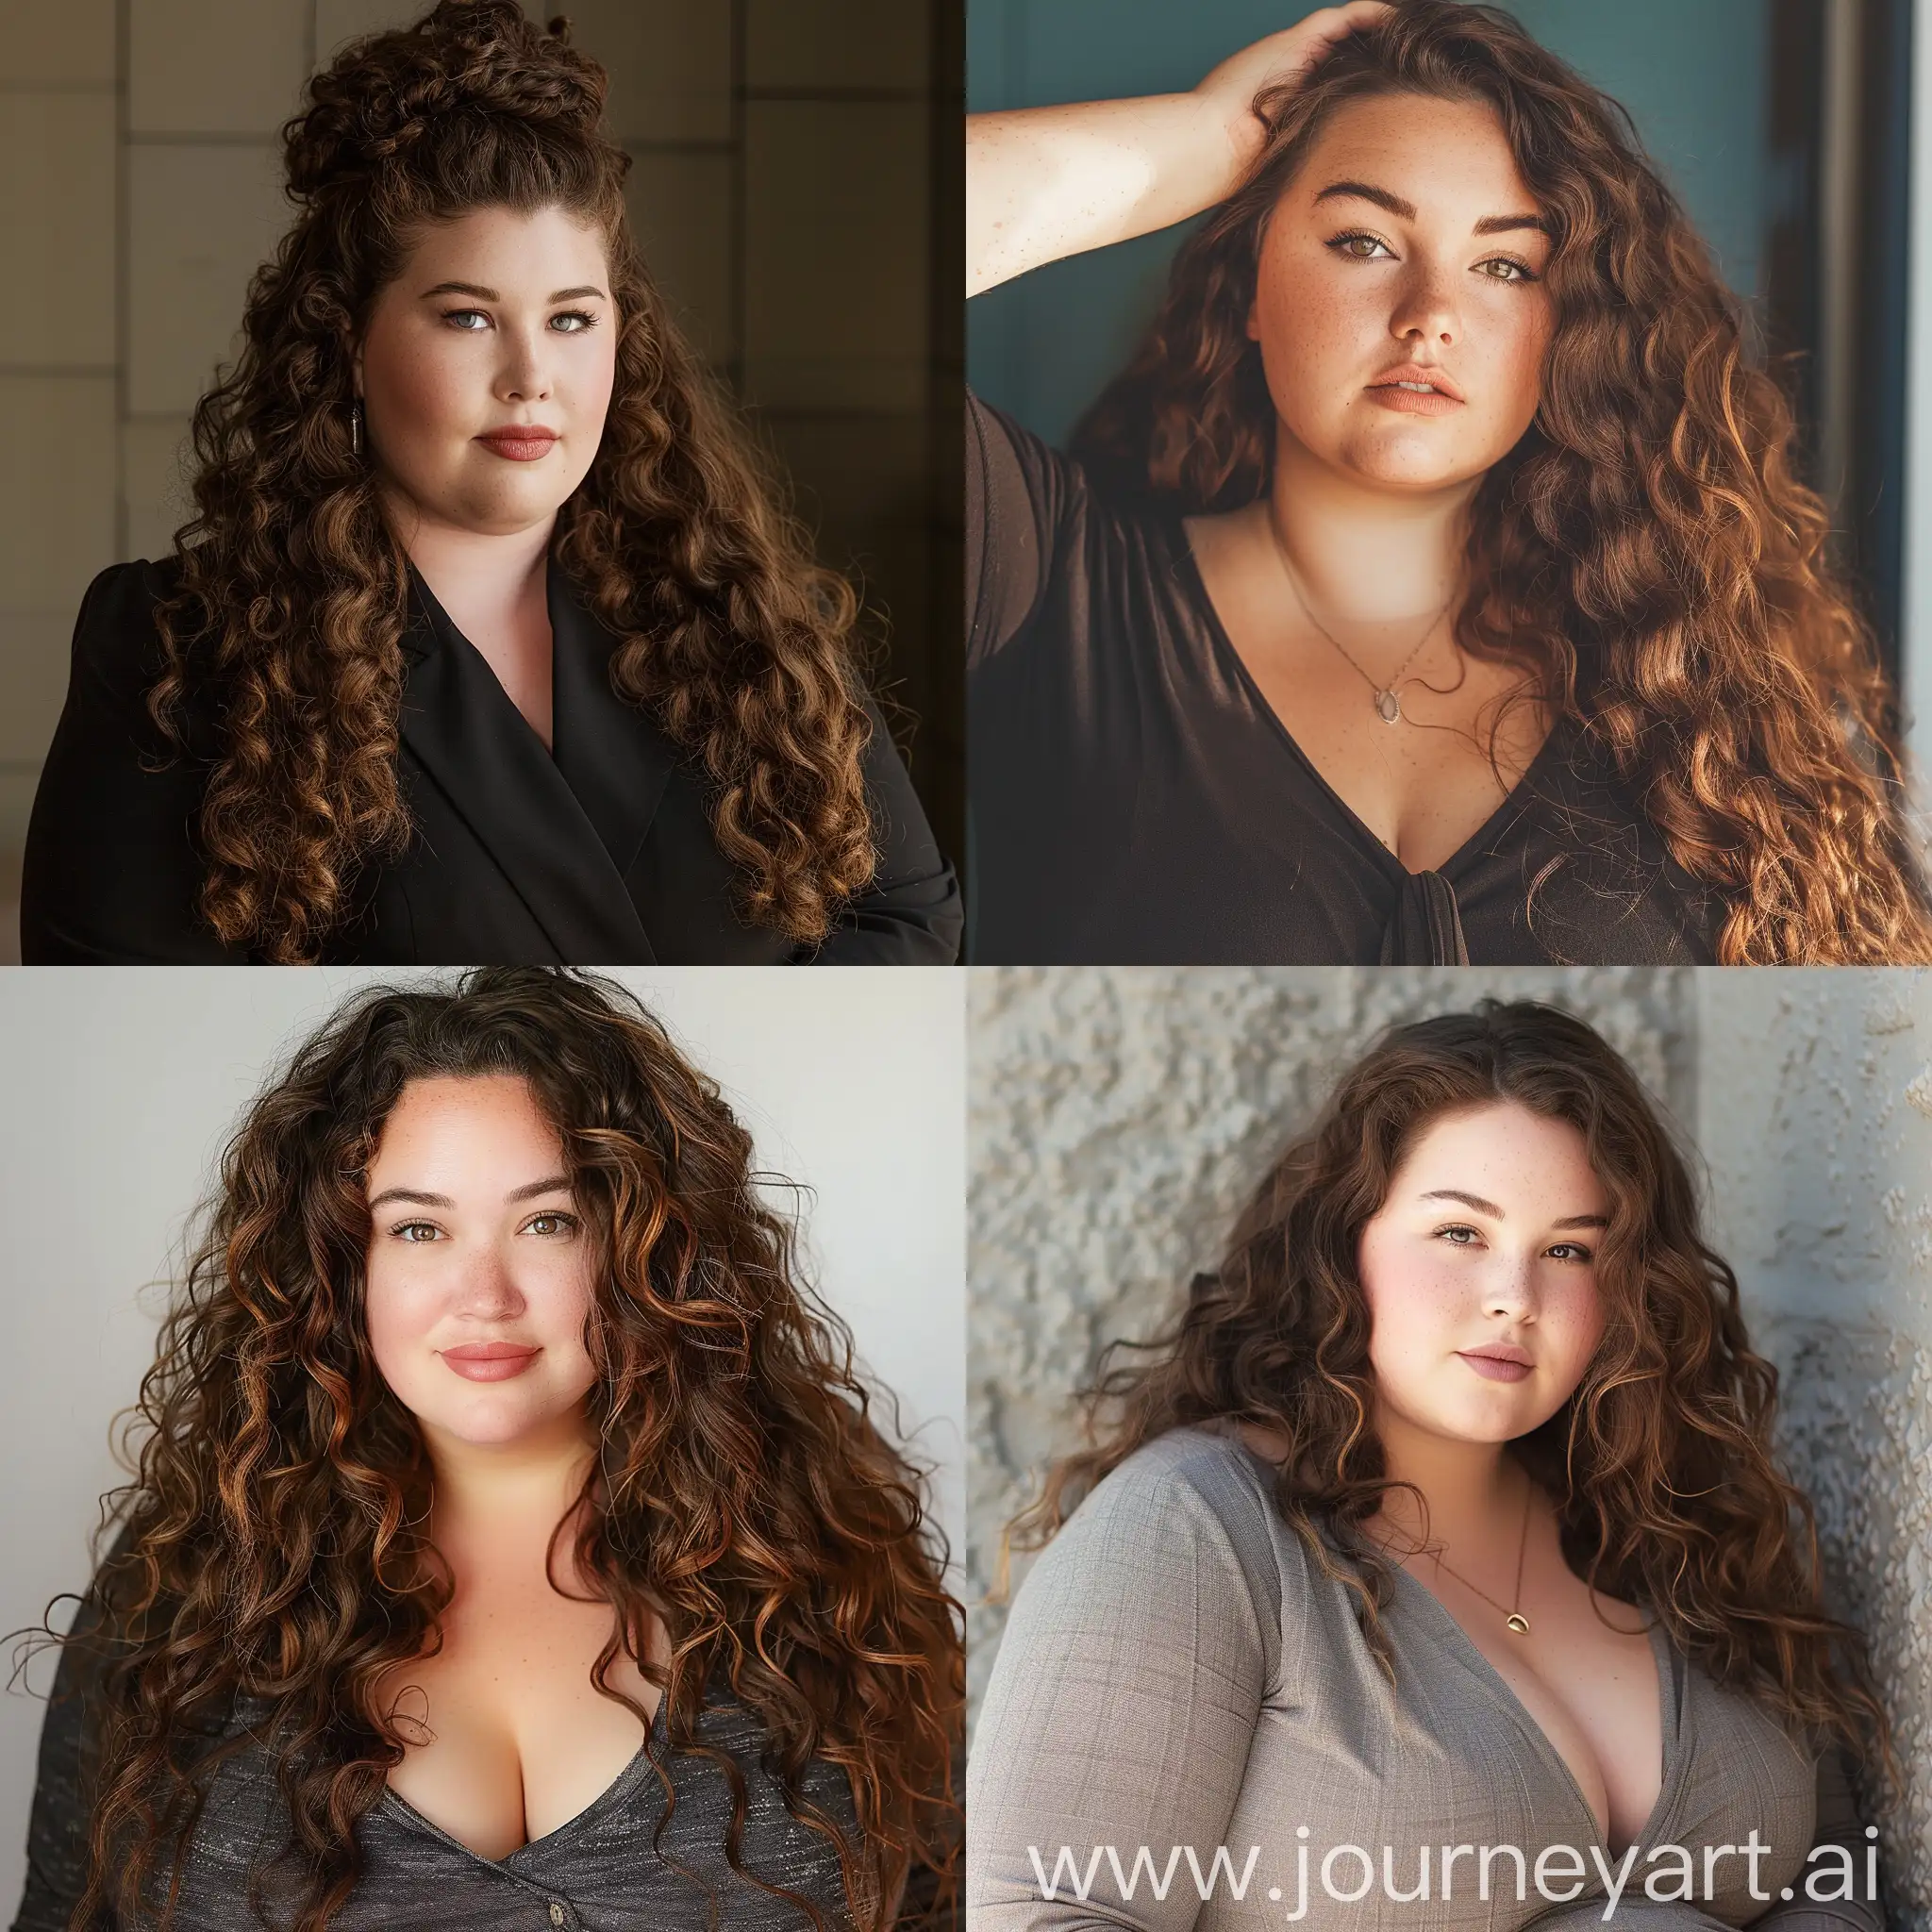 A 24 year old plus sized White American Woman with Long Brown curly hair Office Fashion shot